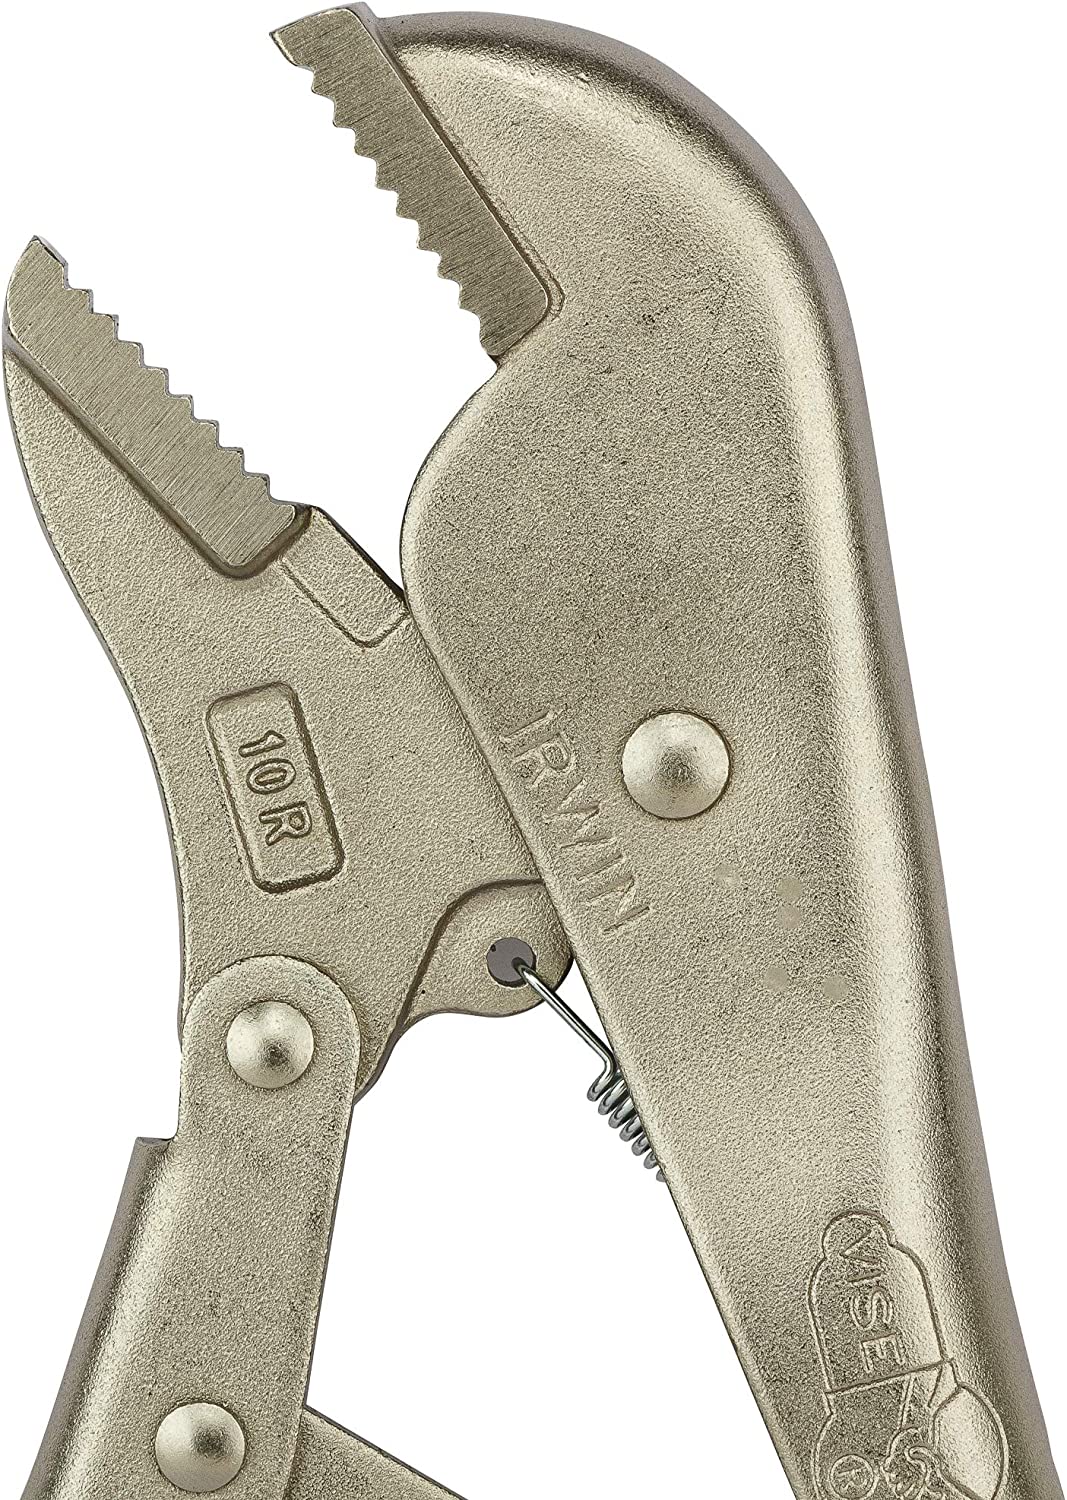 VISE-GRIP 4" Two Curved Jaws With Wire Cutter Locking Plier 3